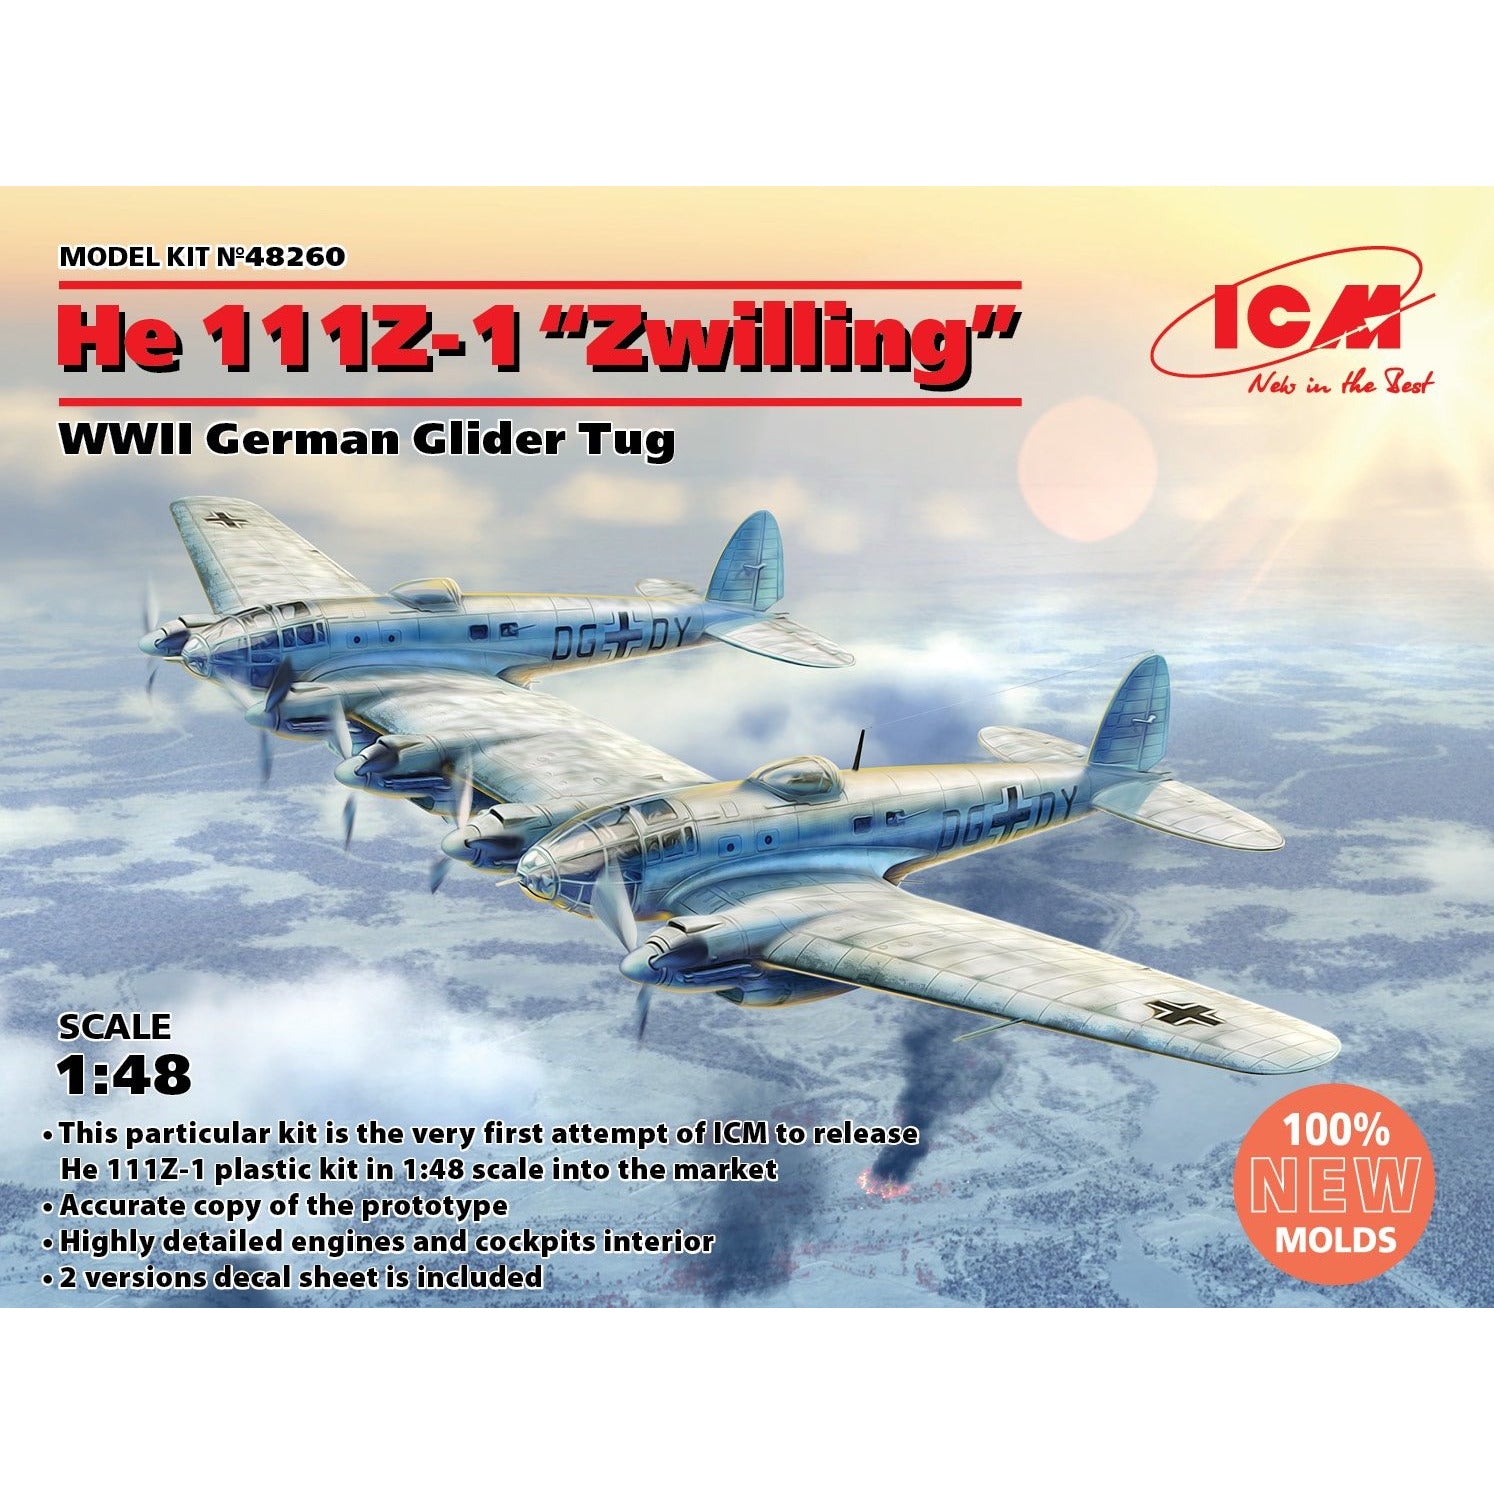 He 111Z-1 Zwilling Glider Tug 1/48 by ICM